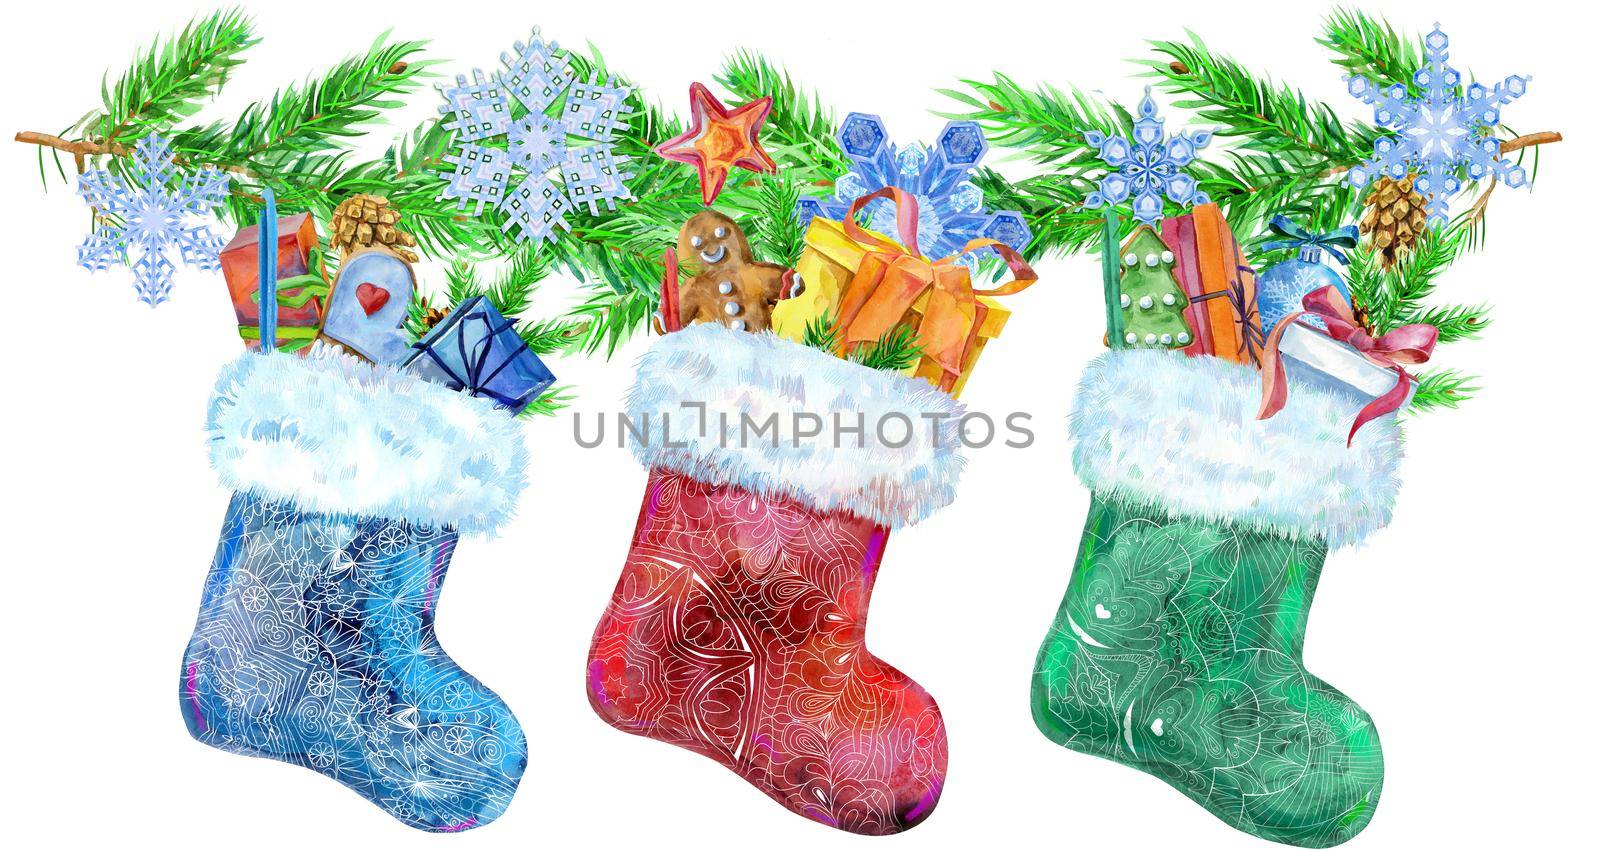 Christmas colorfull patterned socks with gifts and spruce branches isolated on white background. Watercolor hand drawn illustration